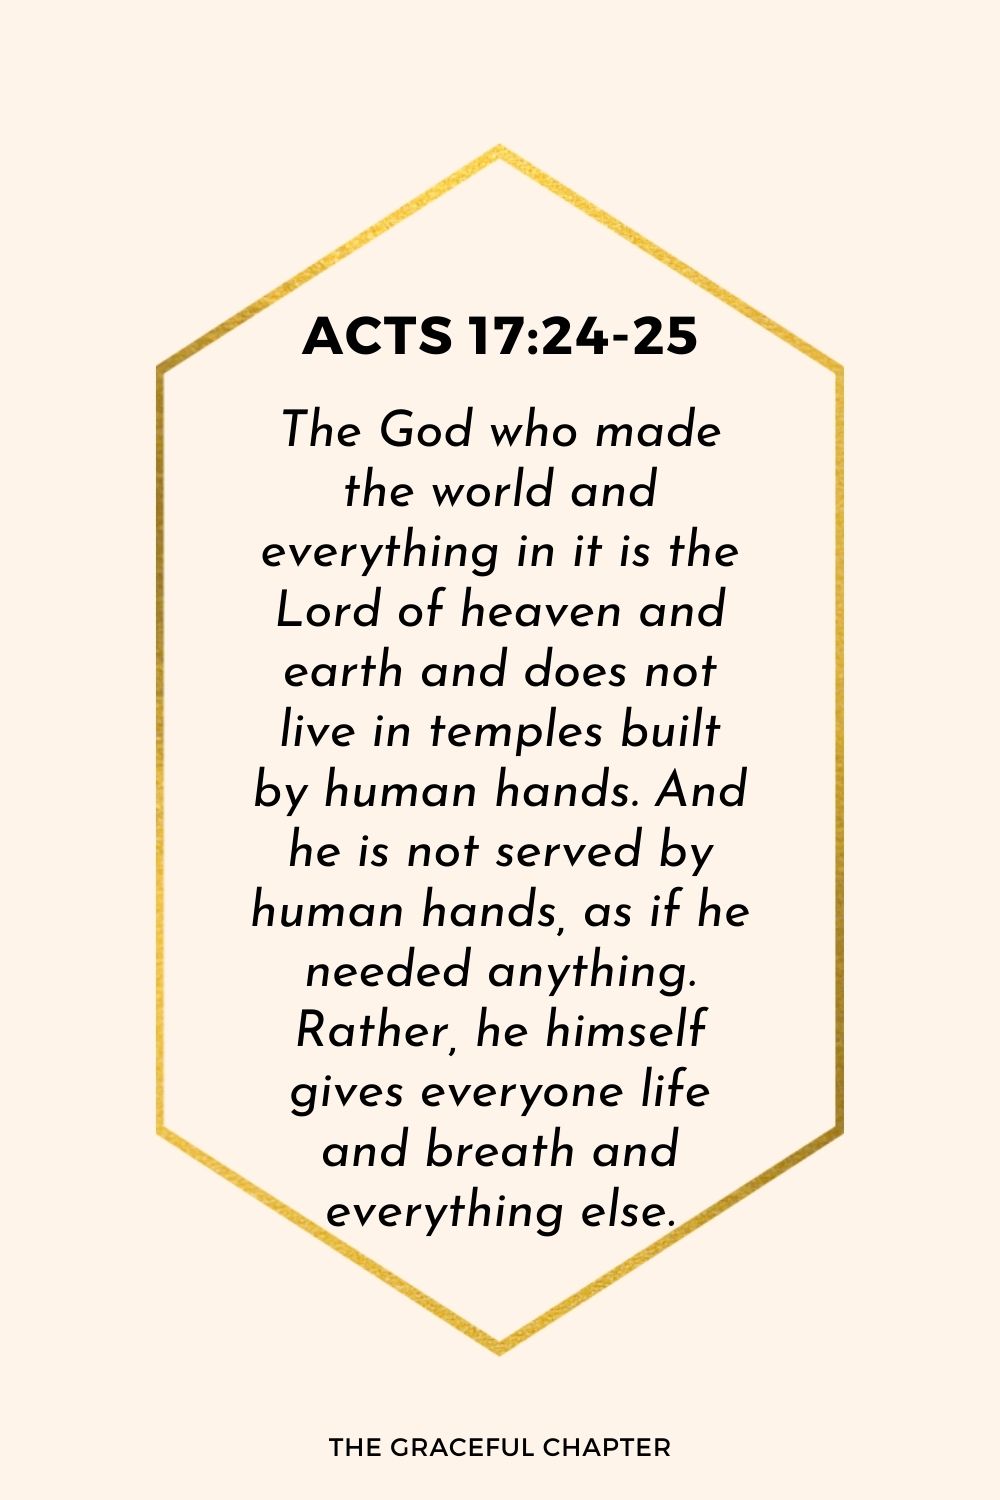 Acts 17:24-25